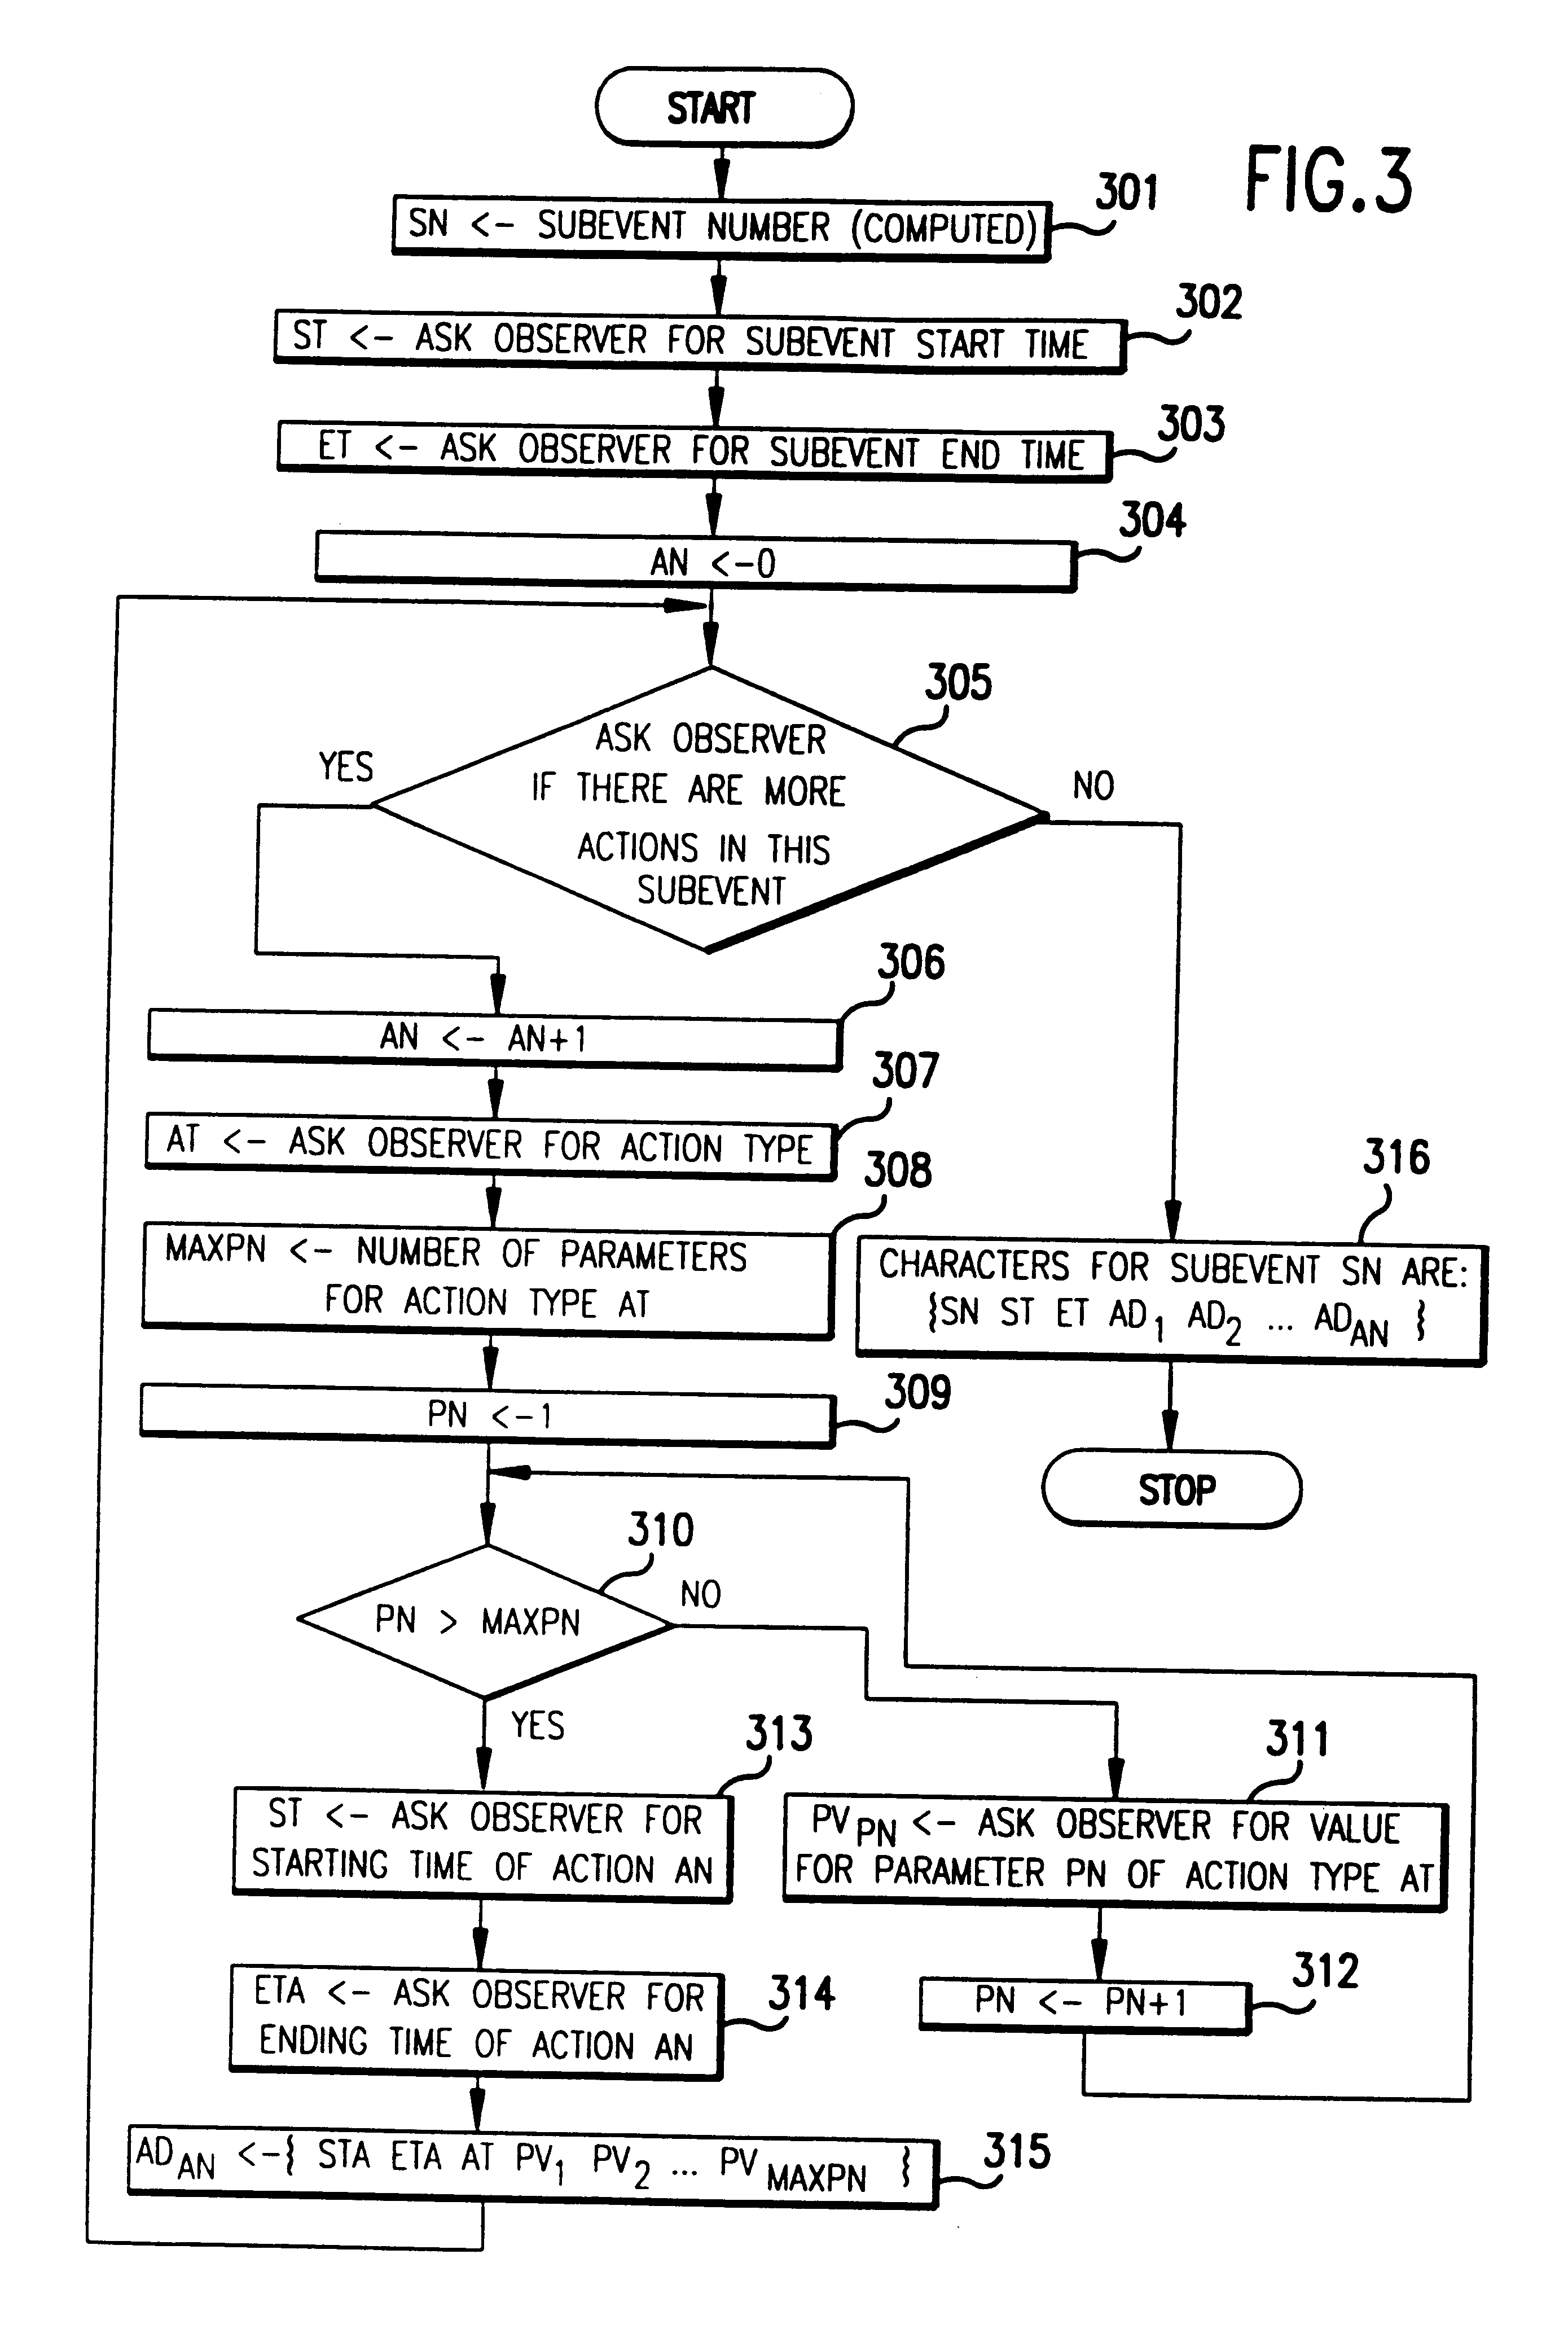 Method and apparatus for broadcasting live events to another location and producing a computer simulation of the events at that location